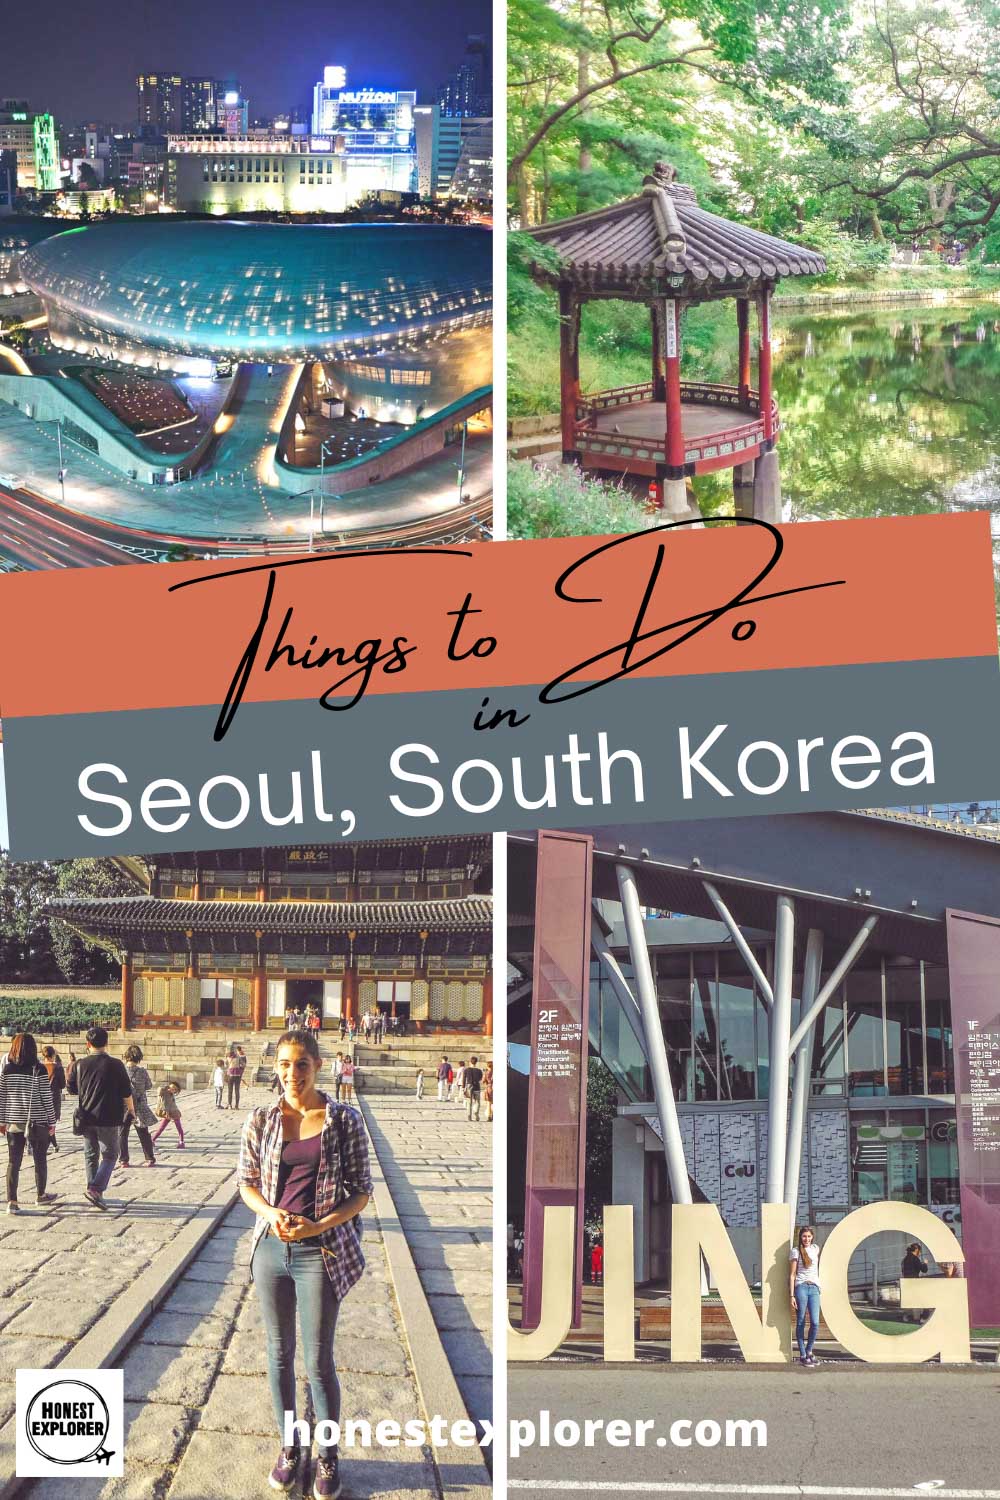 Awesome Things to do in Seoul, South Korea - Honest Explorer